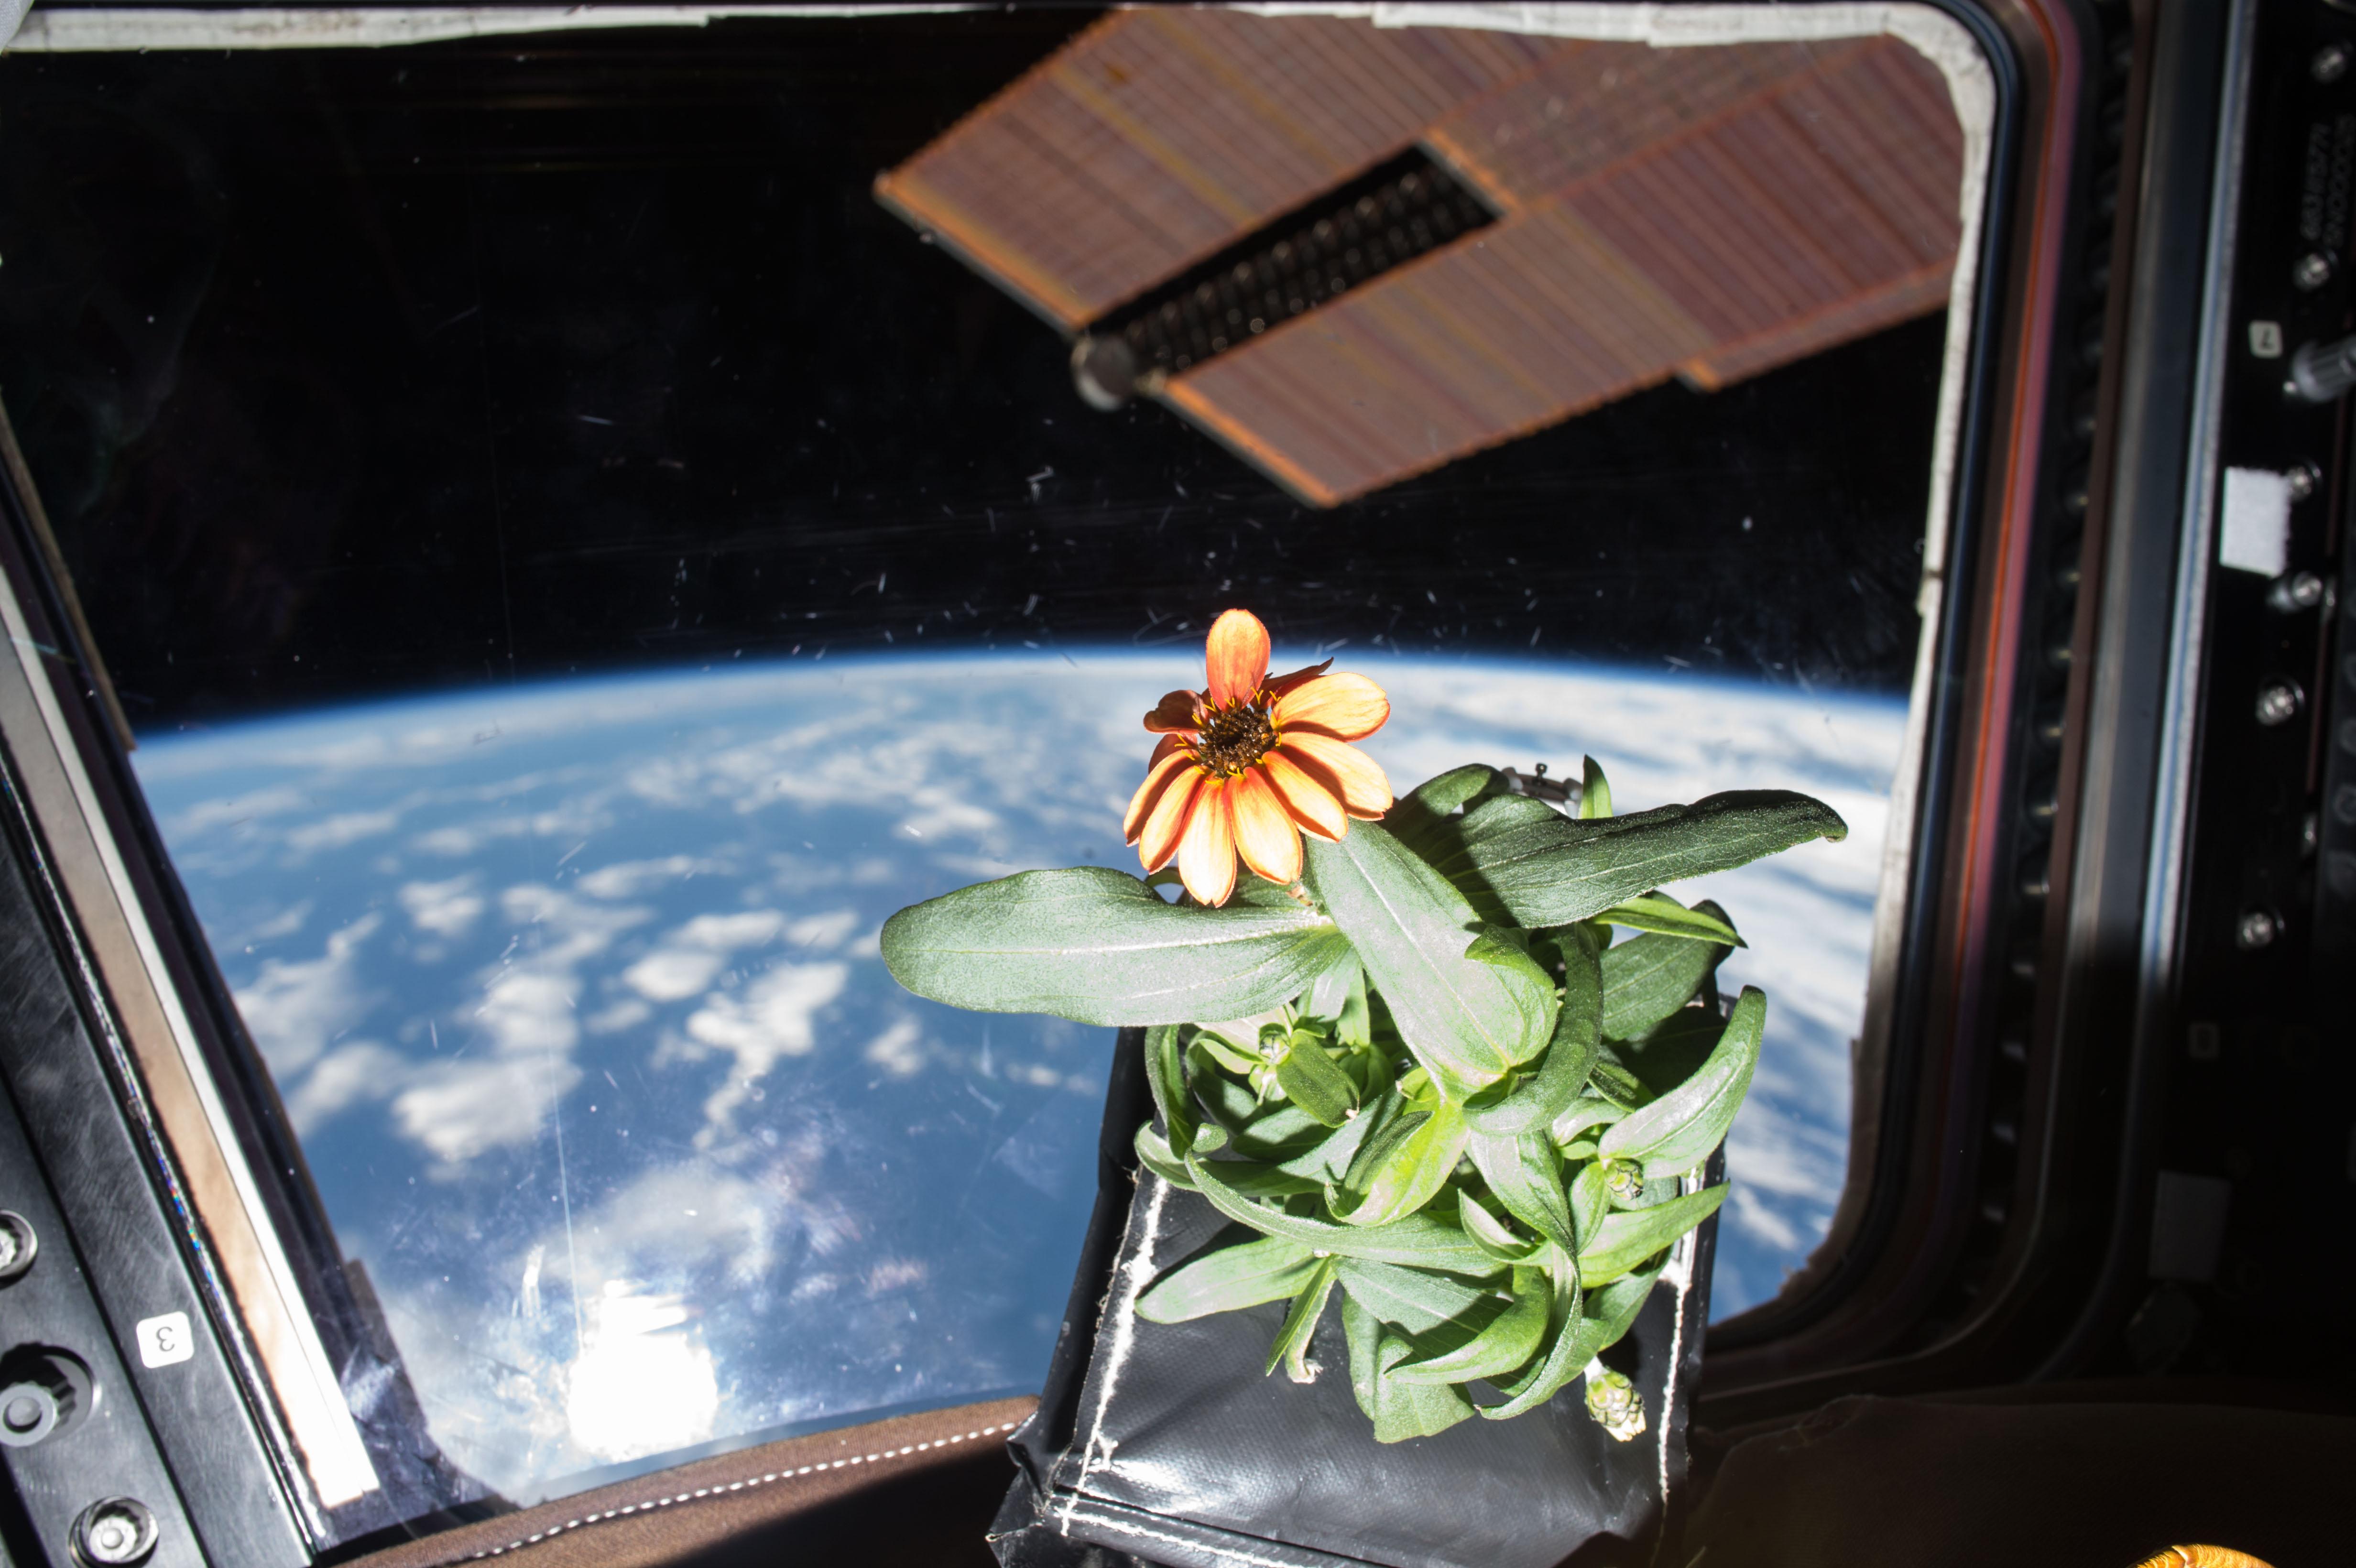 Growing flowers inside the International Space Station